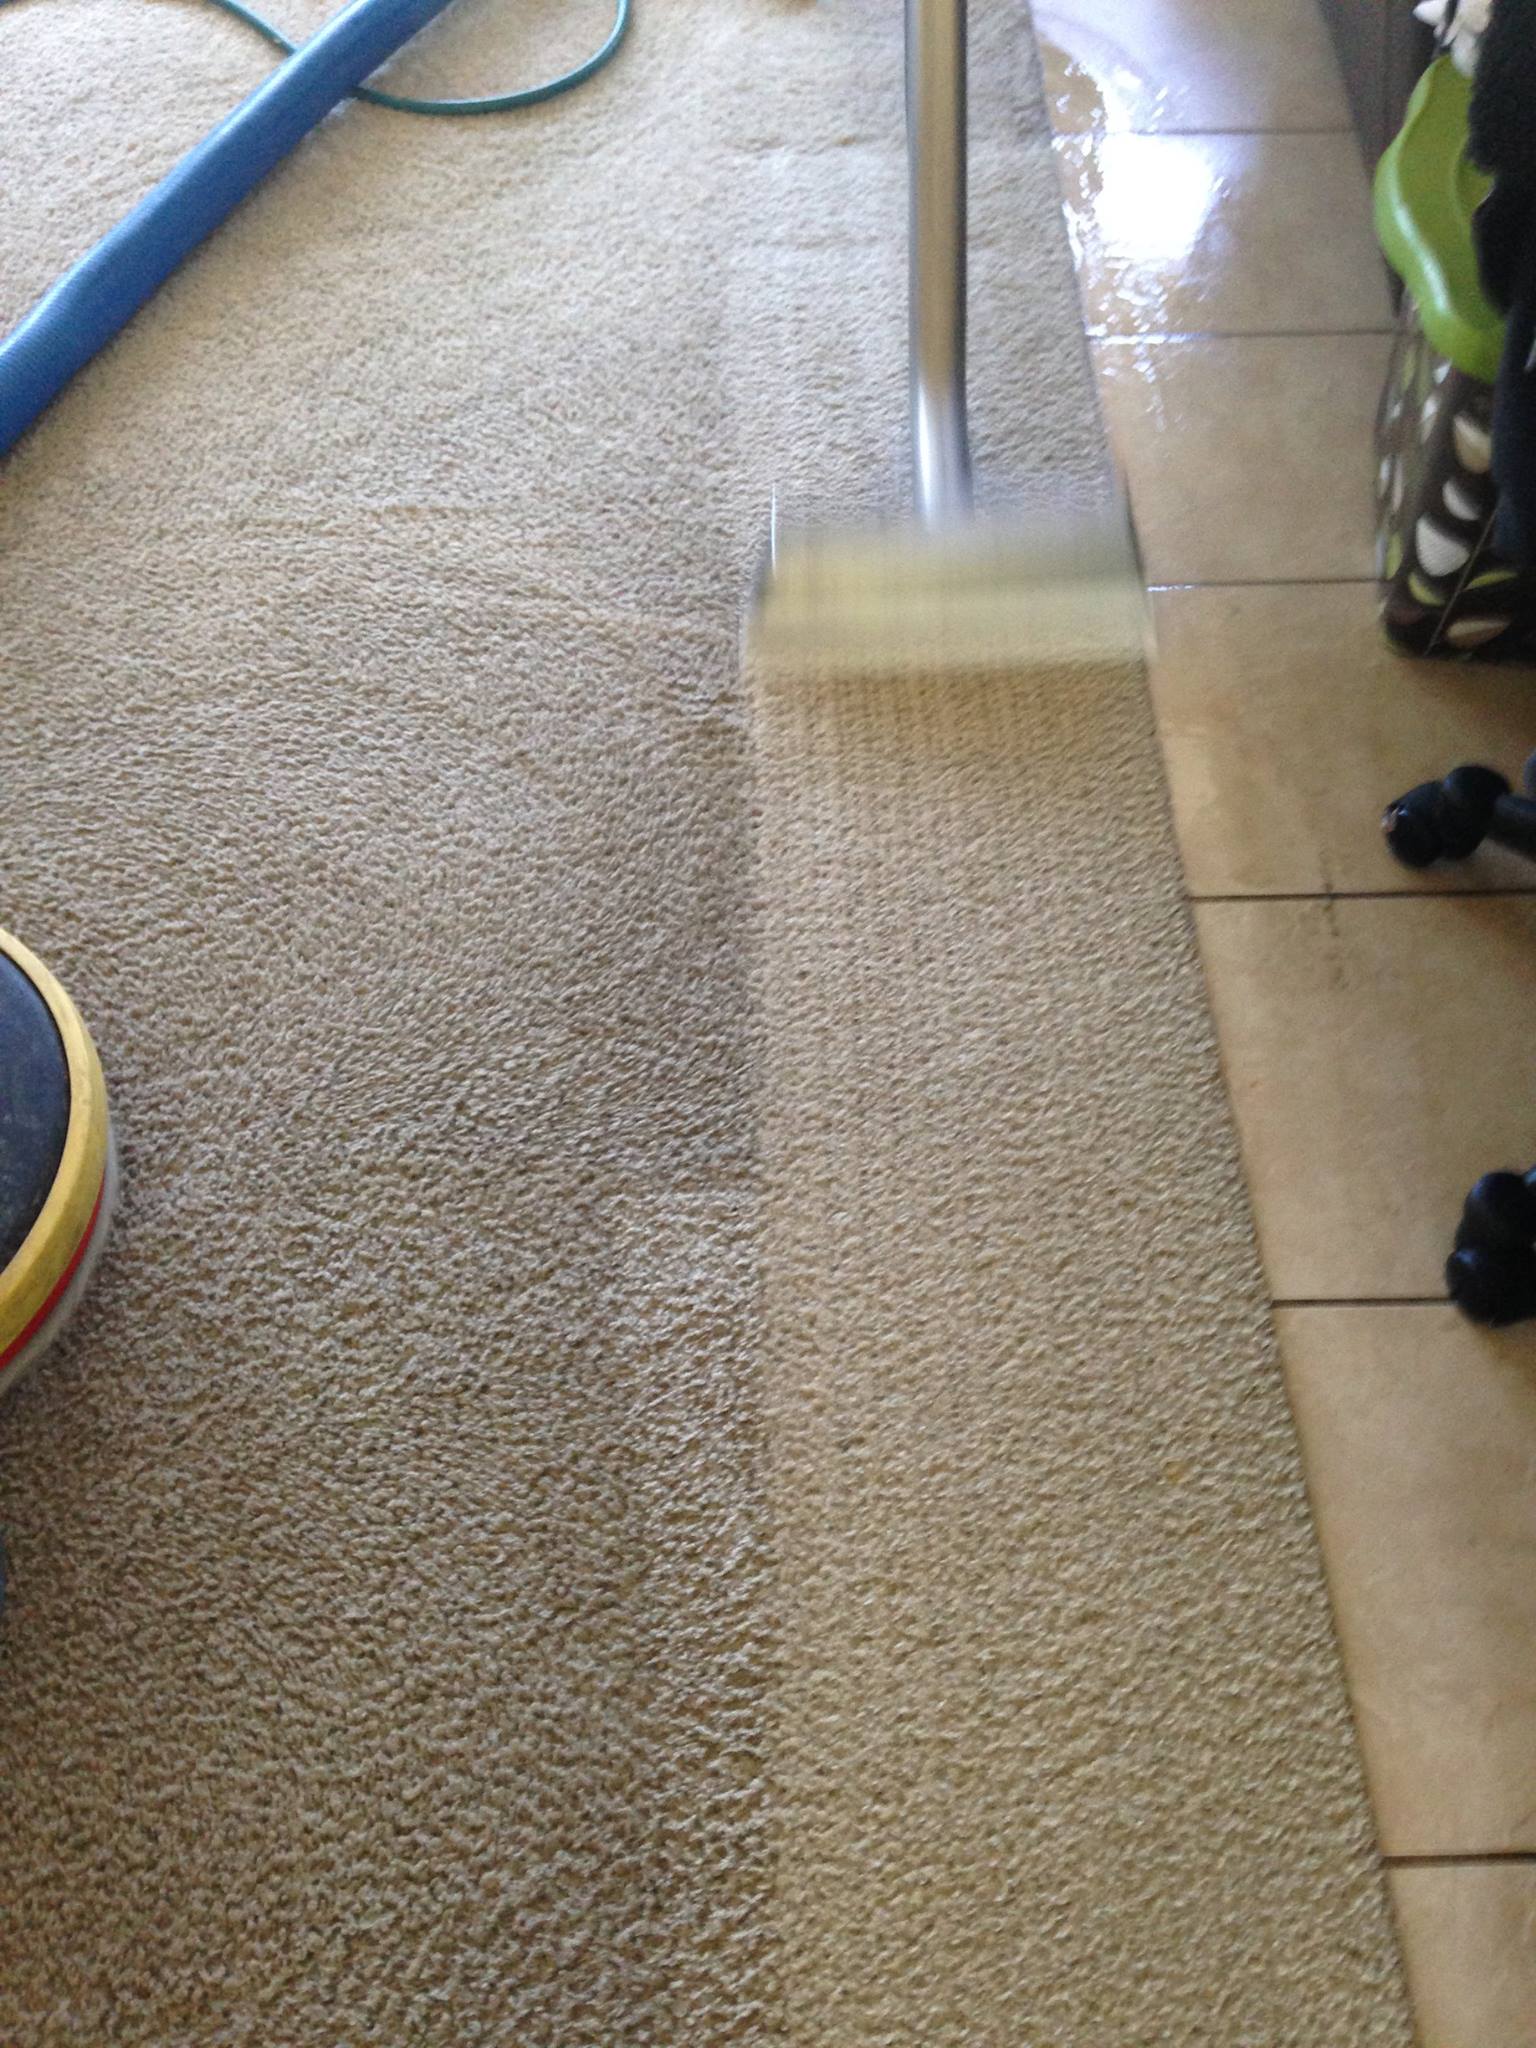 Carpet Cleaning Services - Carpet Cleaning Near me - Installmart